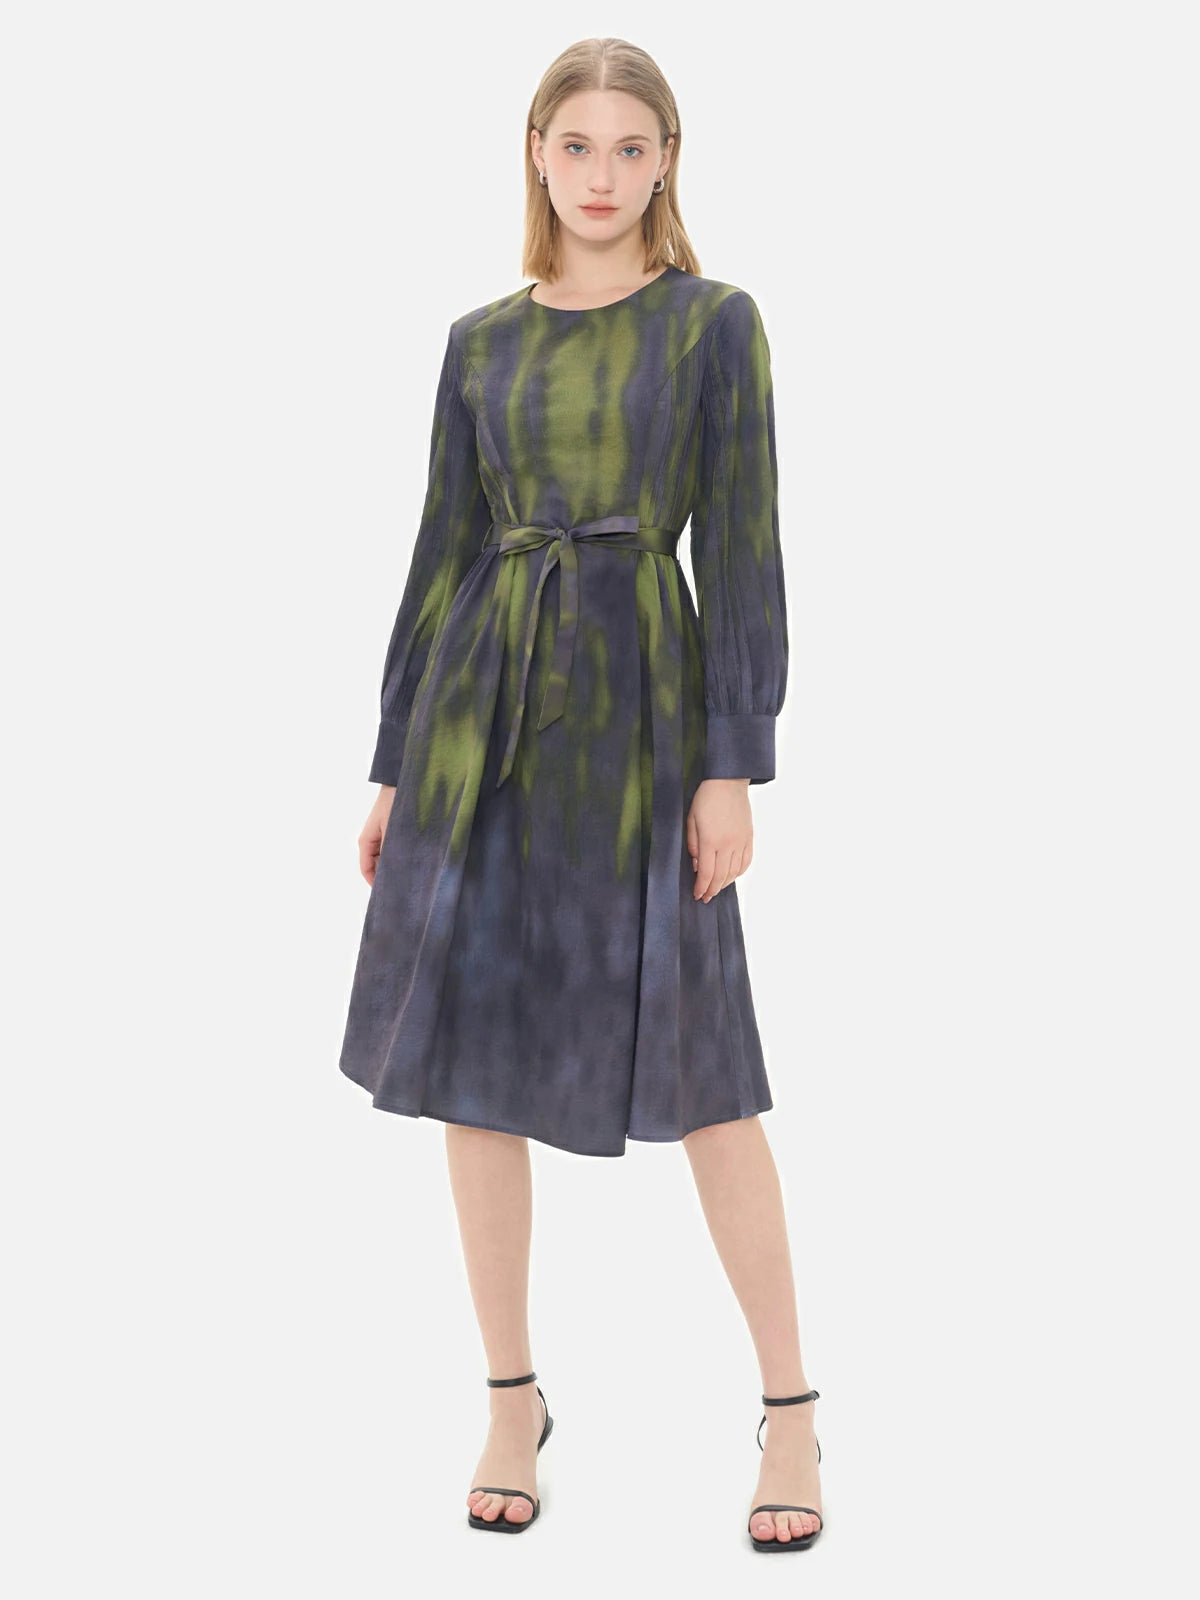 Elevate your style with this round-neck dress featuring a unique gray and green ombre effect and a cinched waist design.